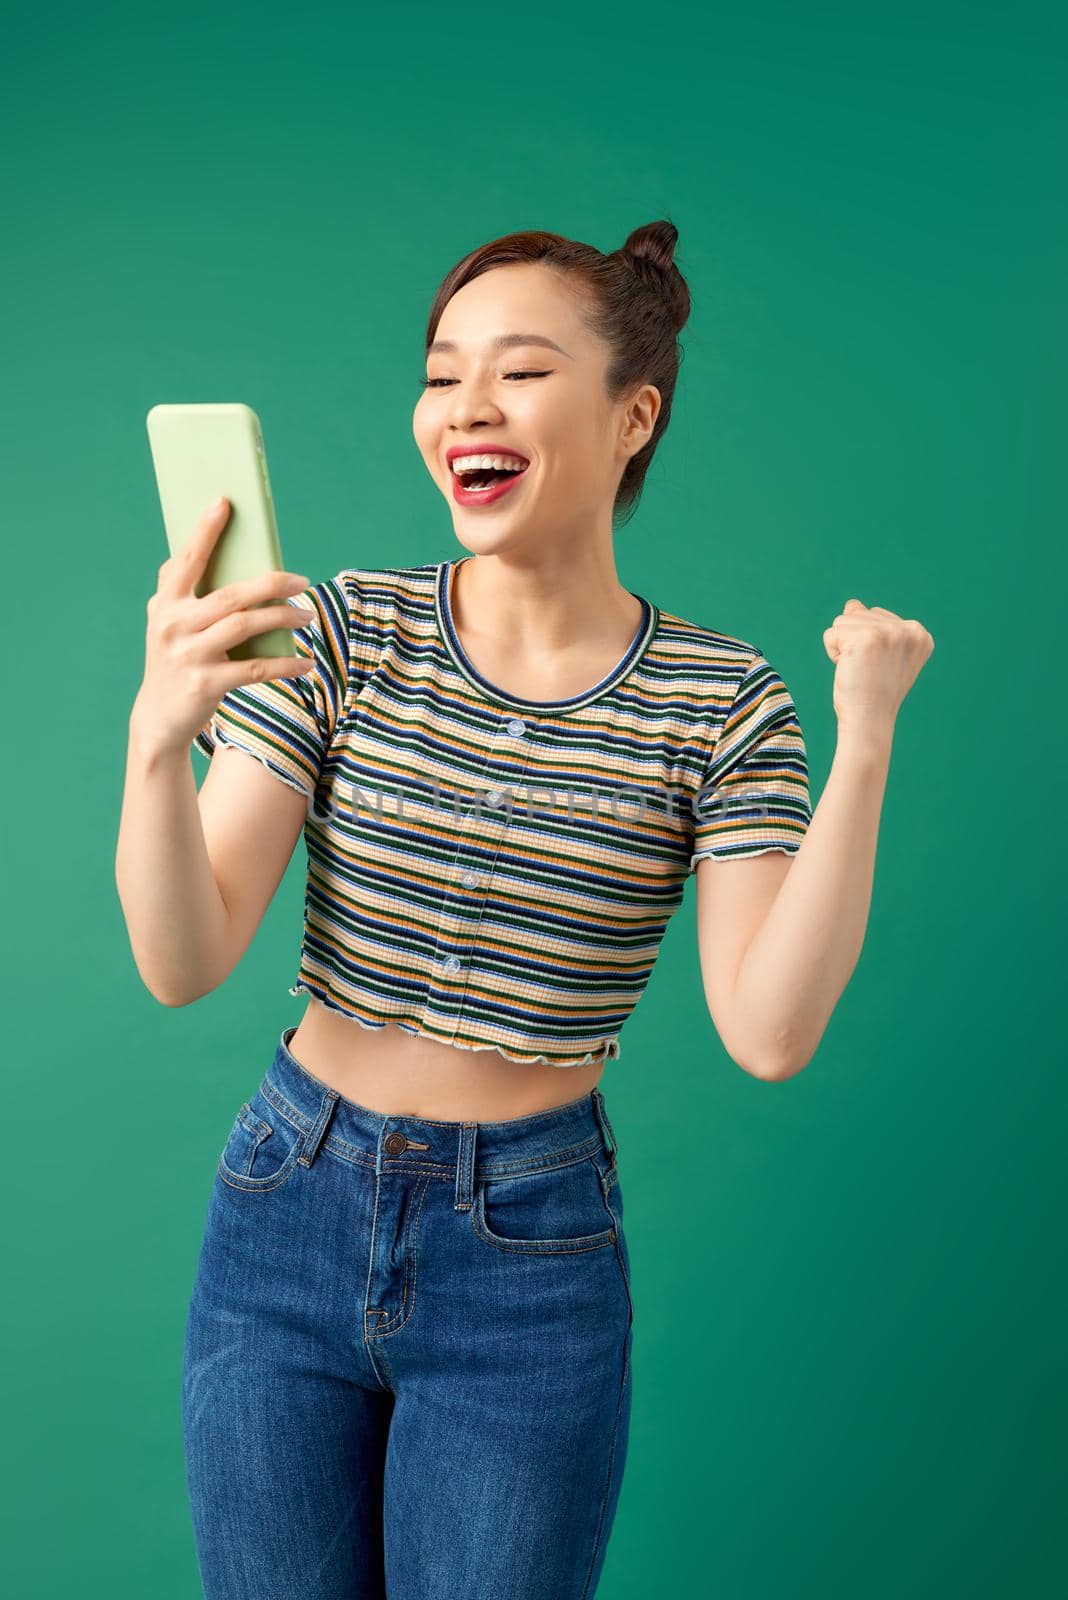 Portrait of a smiling woman making selfie photo on smartphone isolated on green background